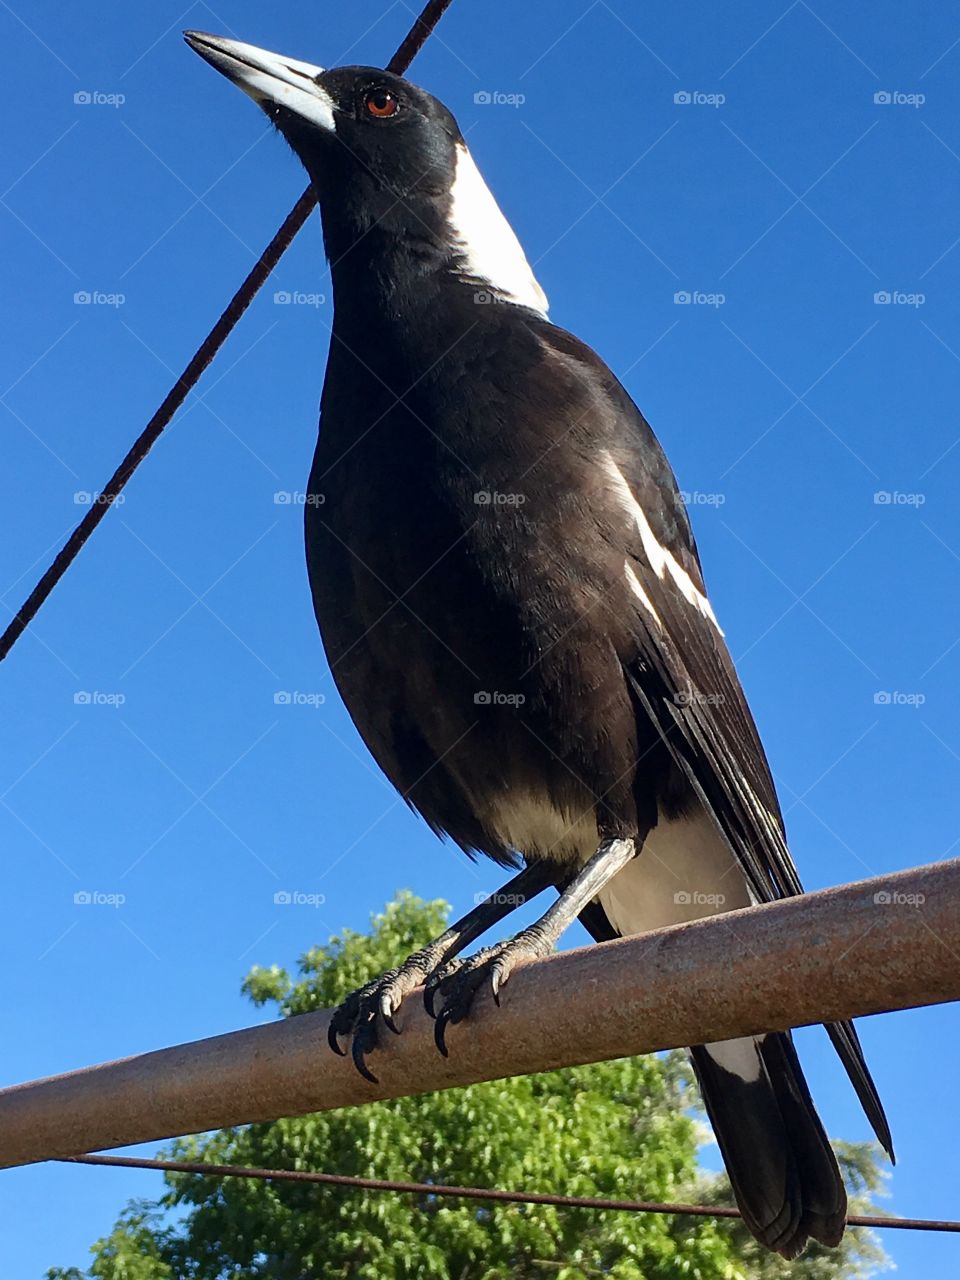 Large Australian magpie on wire warbling